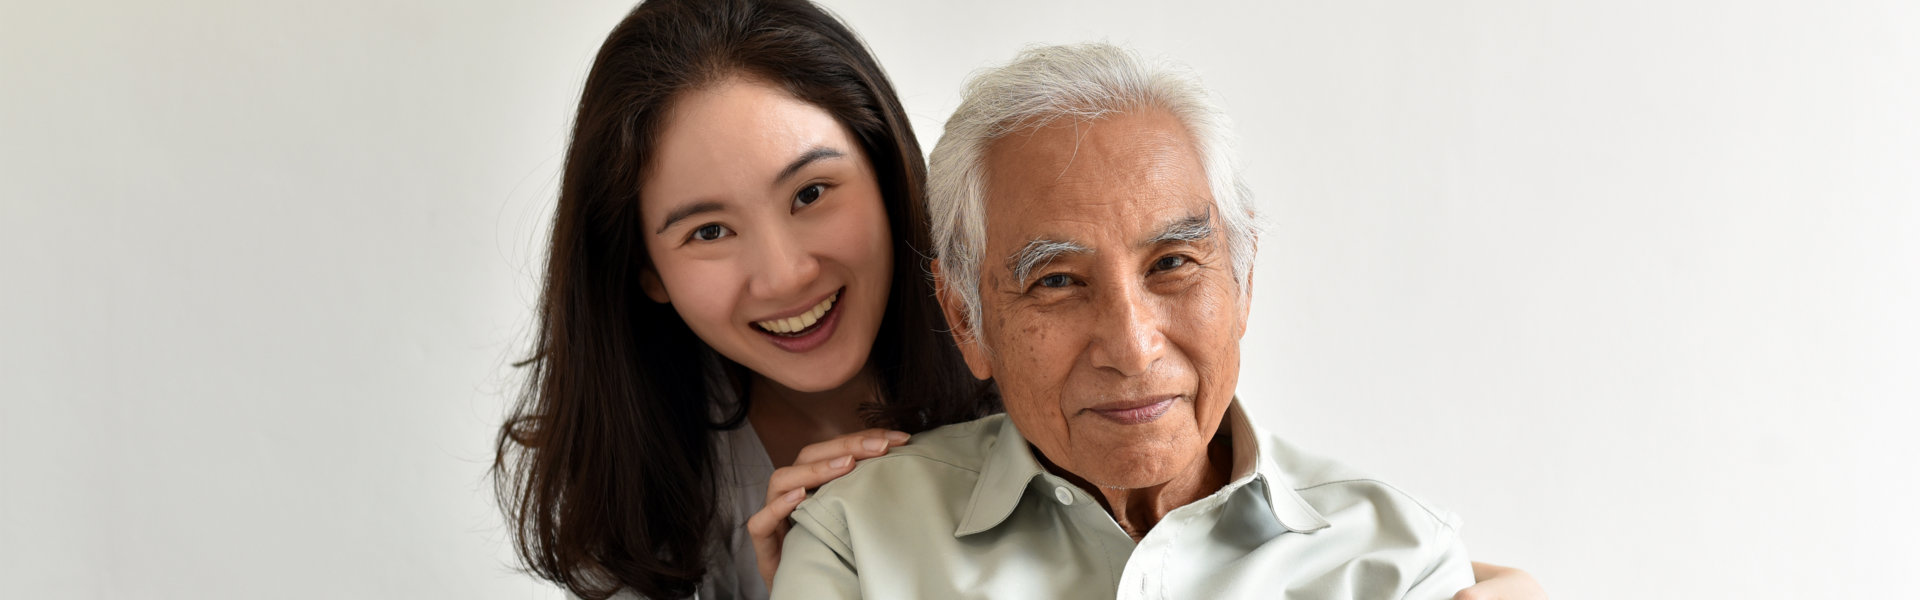 aide and elderly man smiling